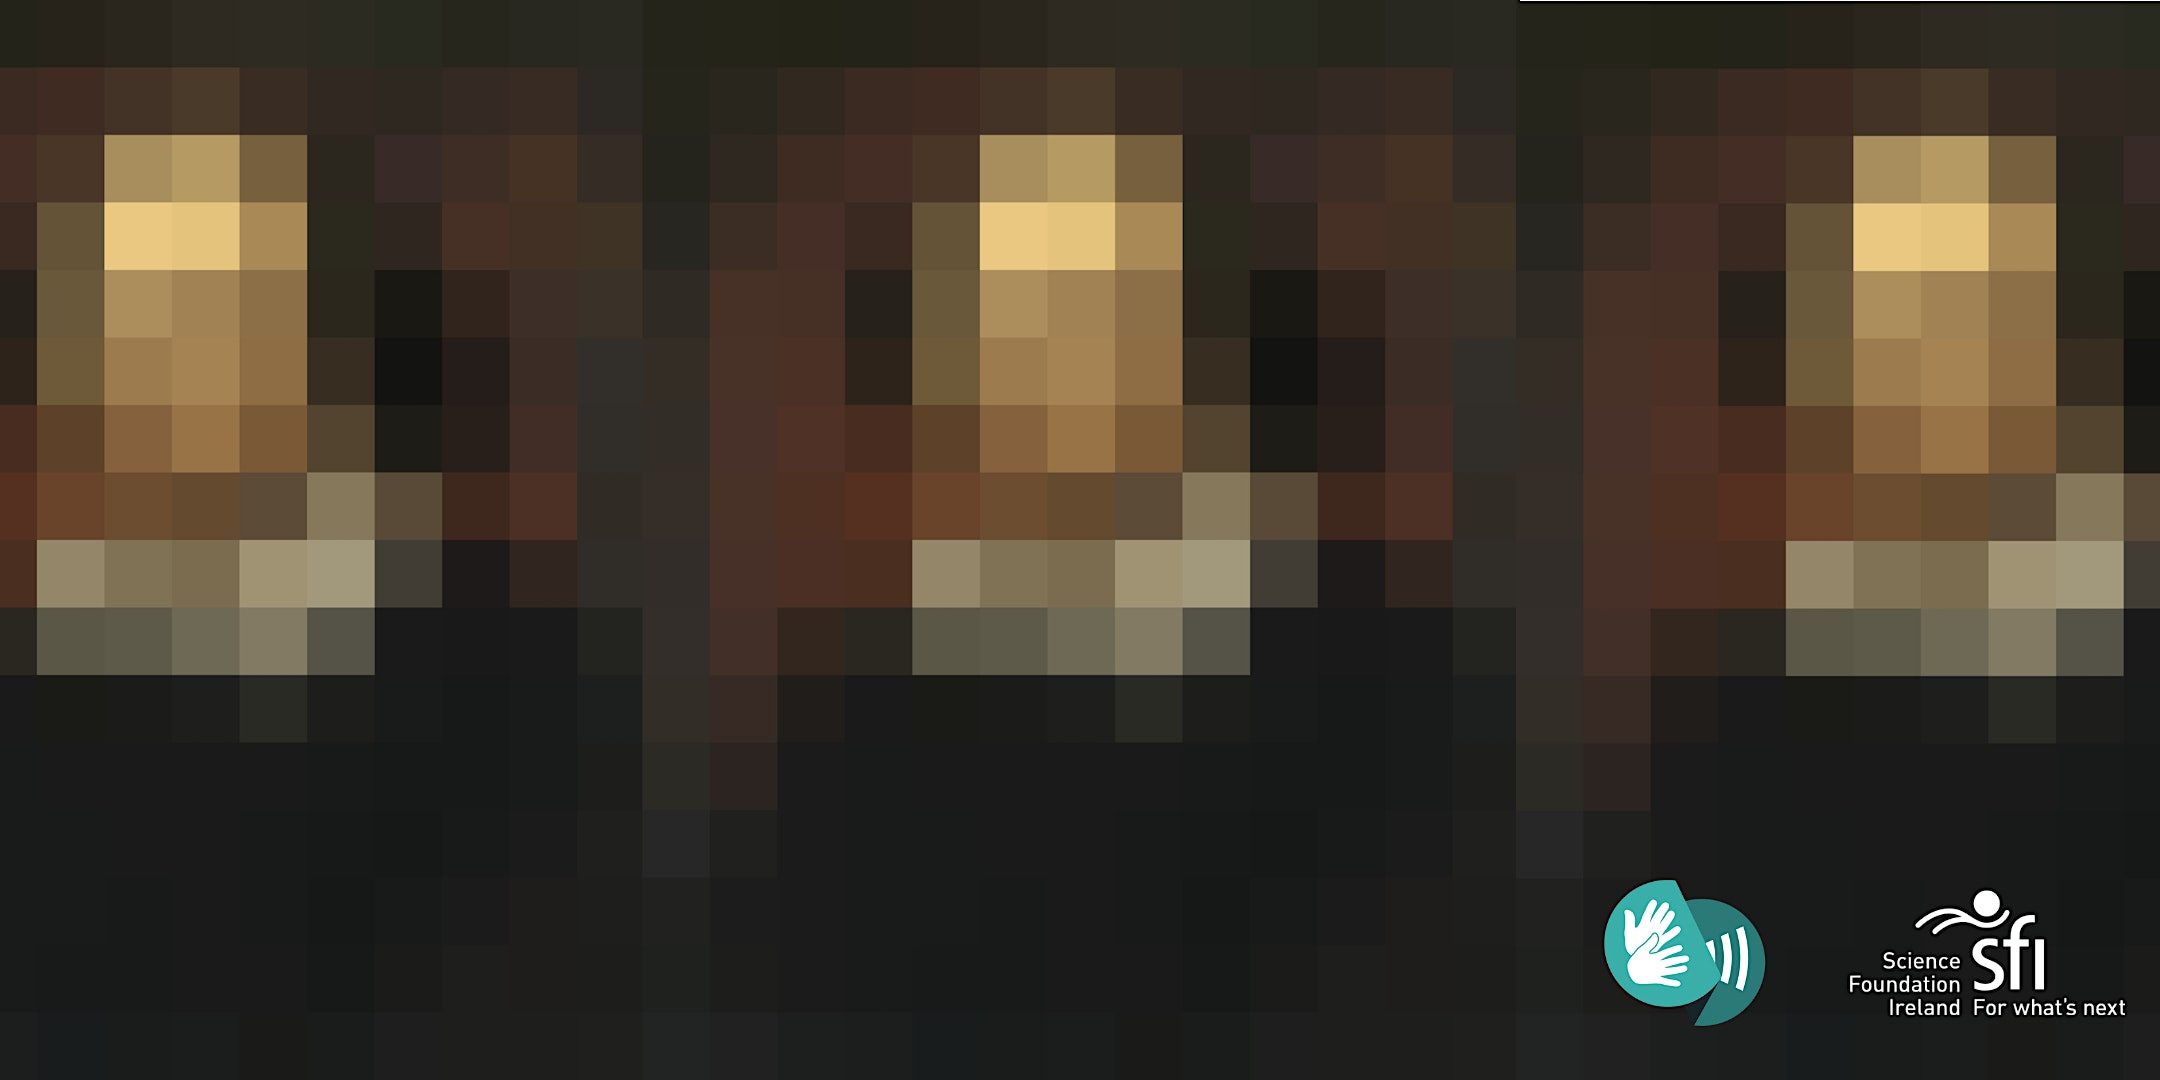 A pixelated image of three Shakespeare heads to advertise the All The World's A Screen performance